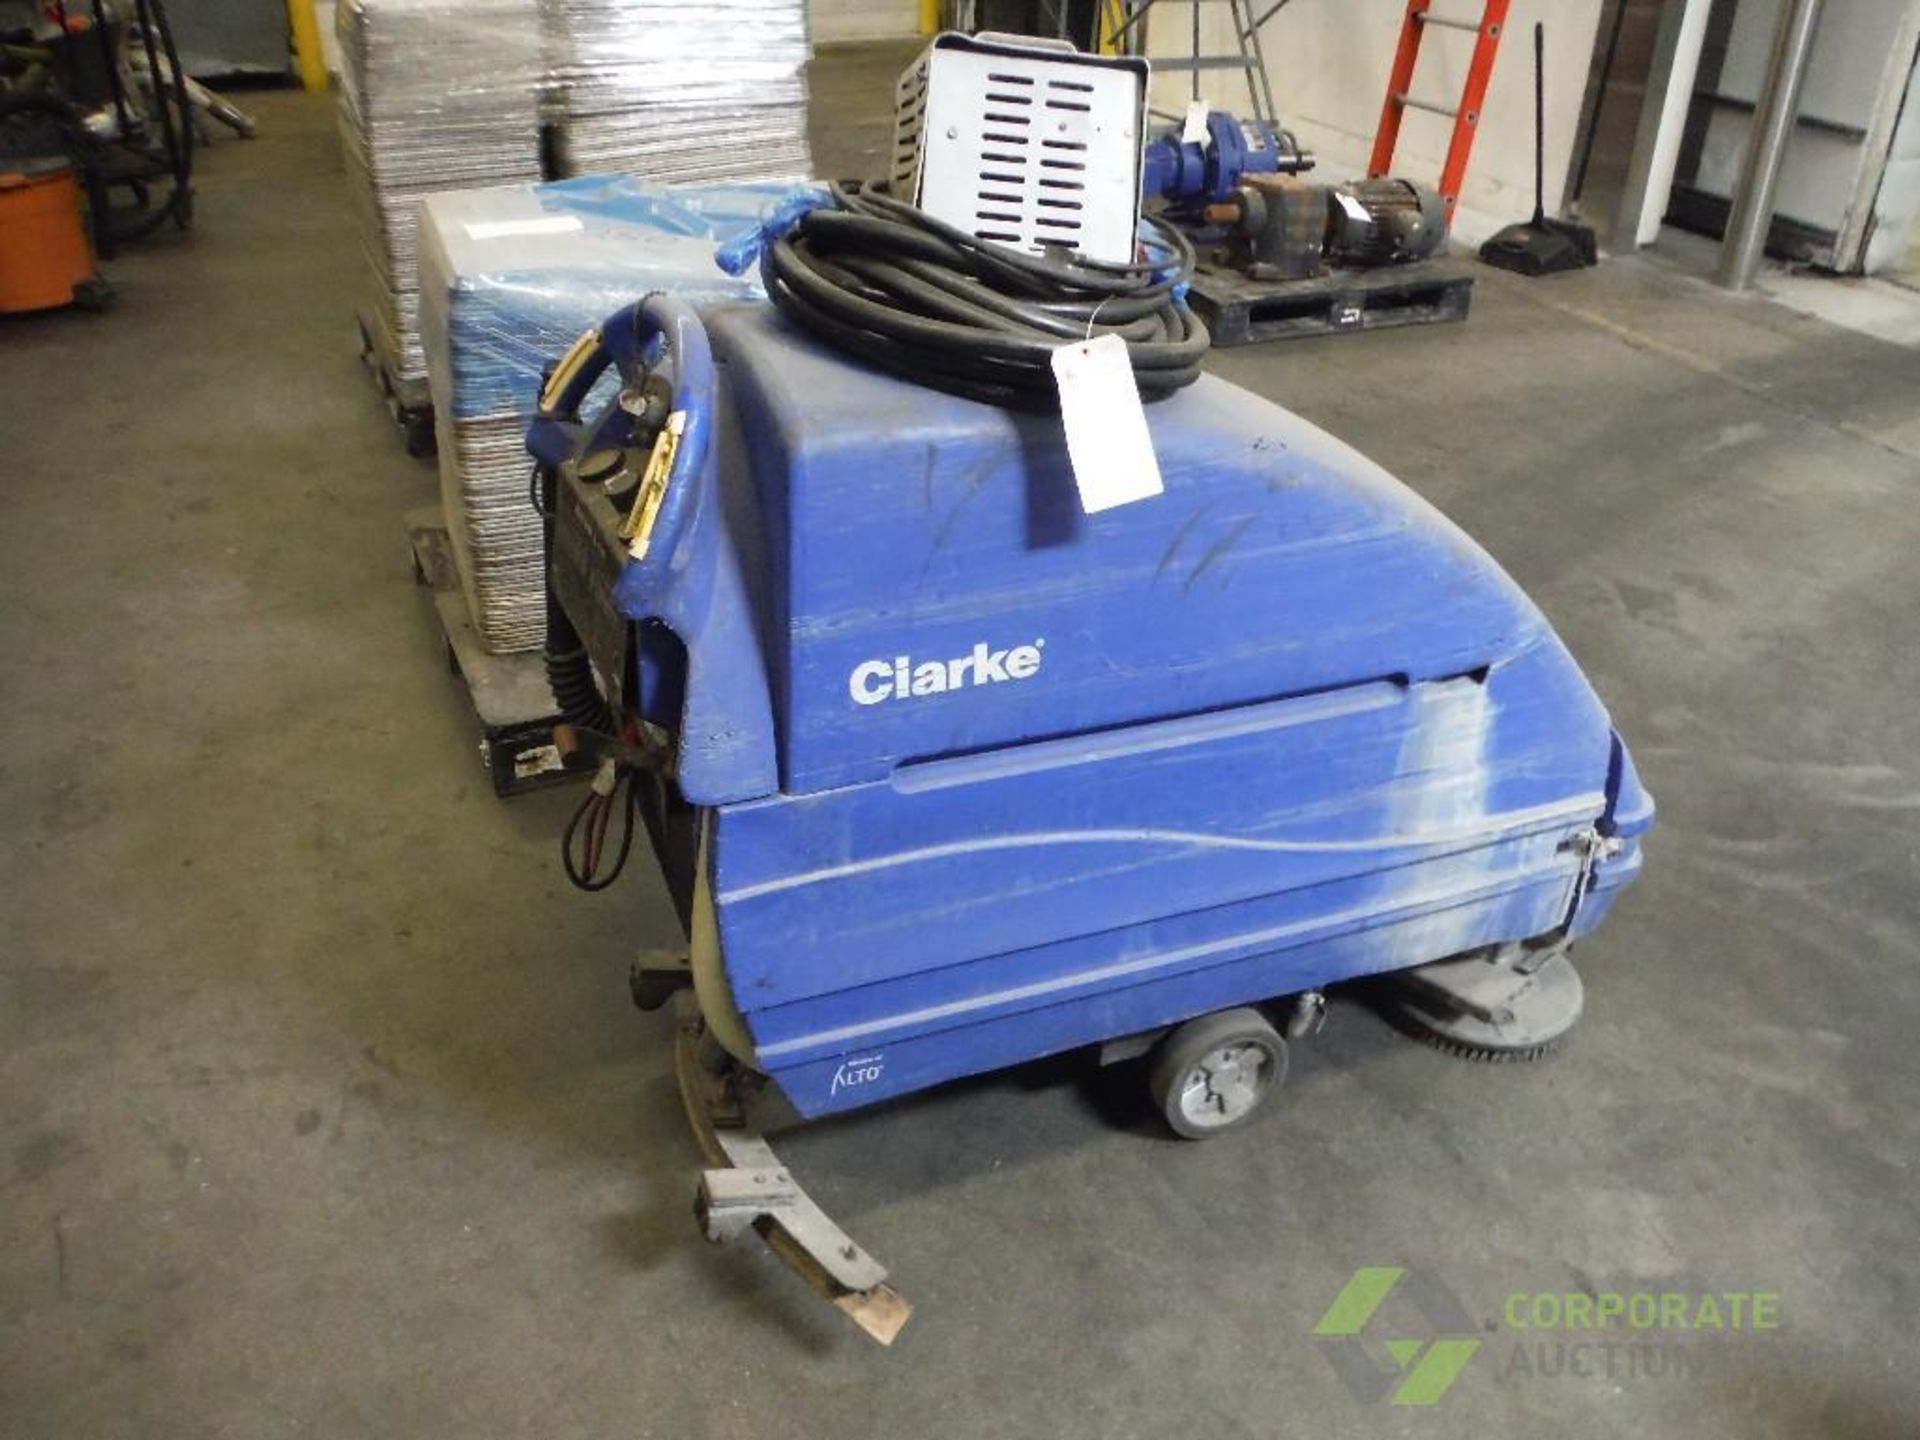 Clarke walk behind floor scrubber, Model Encore L24263300AHPADS, SN CJ1131, 24 volt, with charger - Image 2 of 8